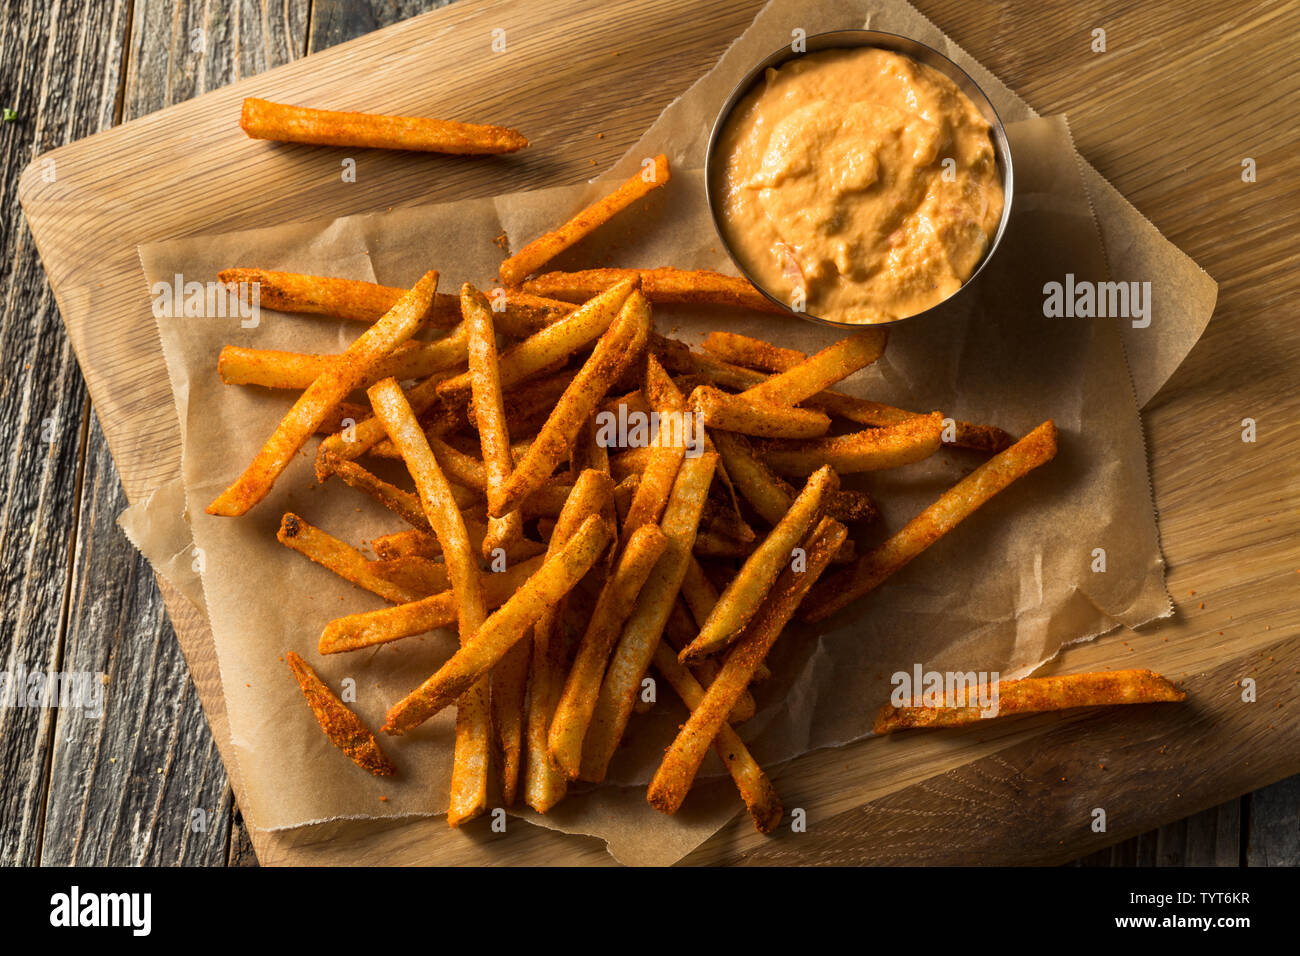 Homemade Spicy Mexican Nacho Fries with Cheese Sauce Stock Photo